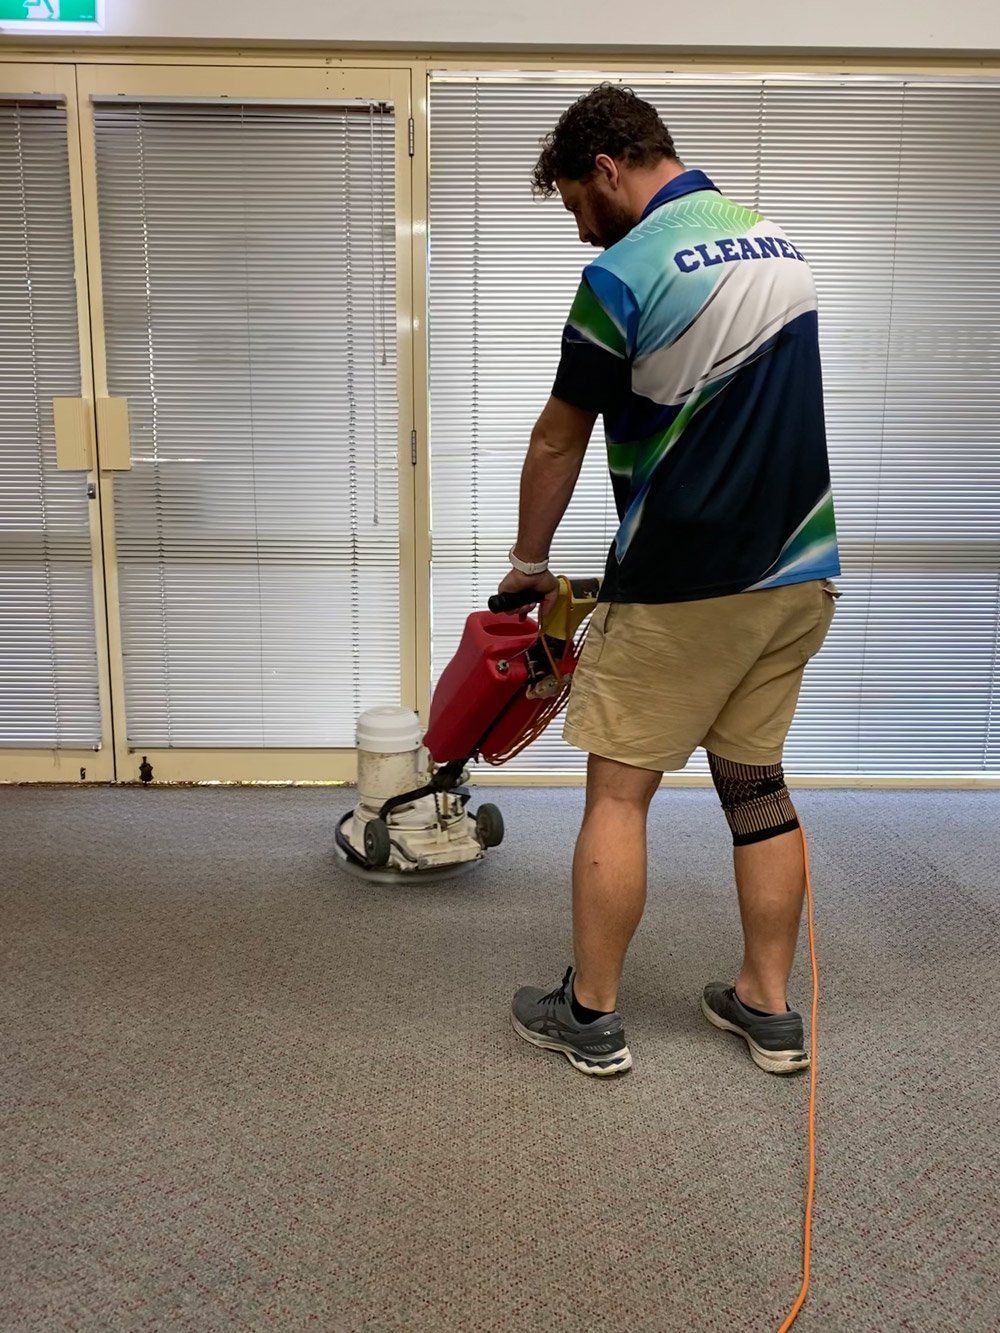 Carpet Cleaning — Cleaning Neways in Casino, NSW